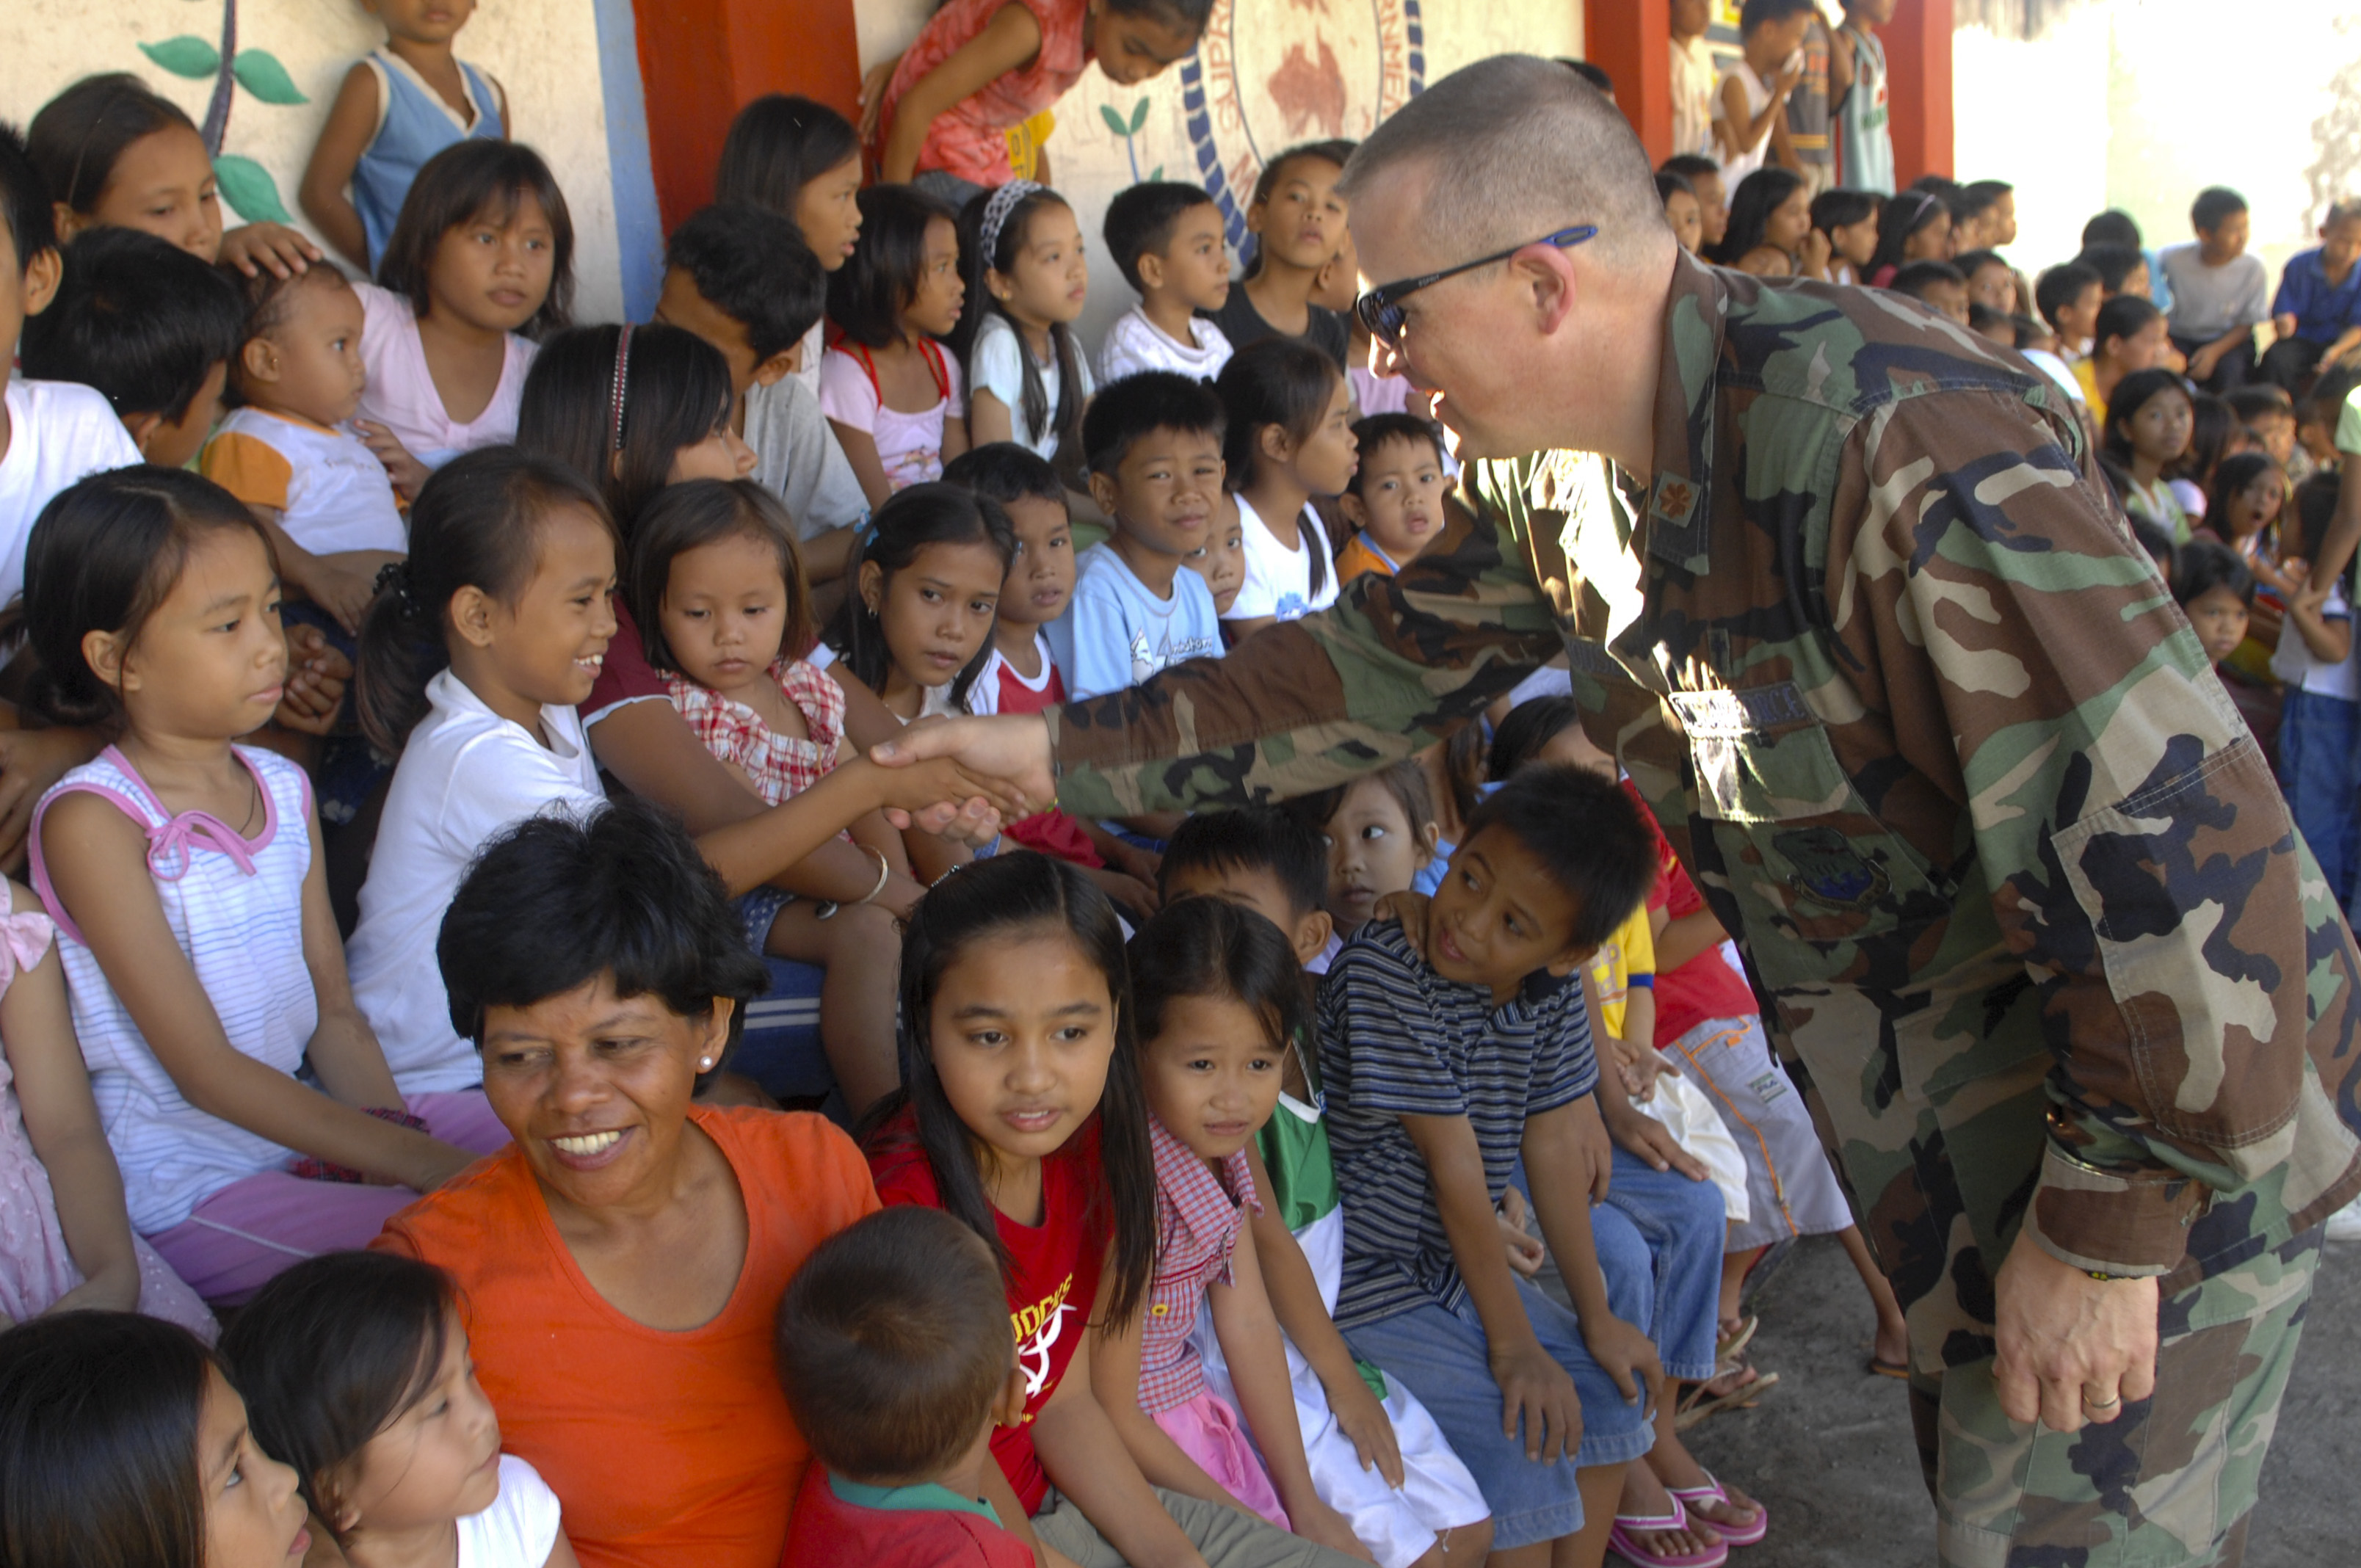 US Navy 071215-N-7286M-010 U.S. Air Force Chaplain, Maj. Philip G. Houser meets with the children at MEIN College